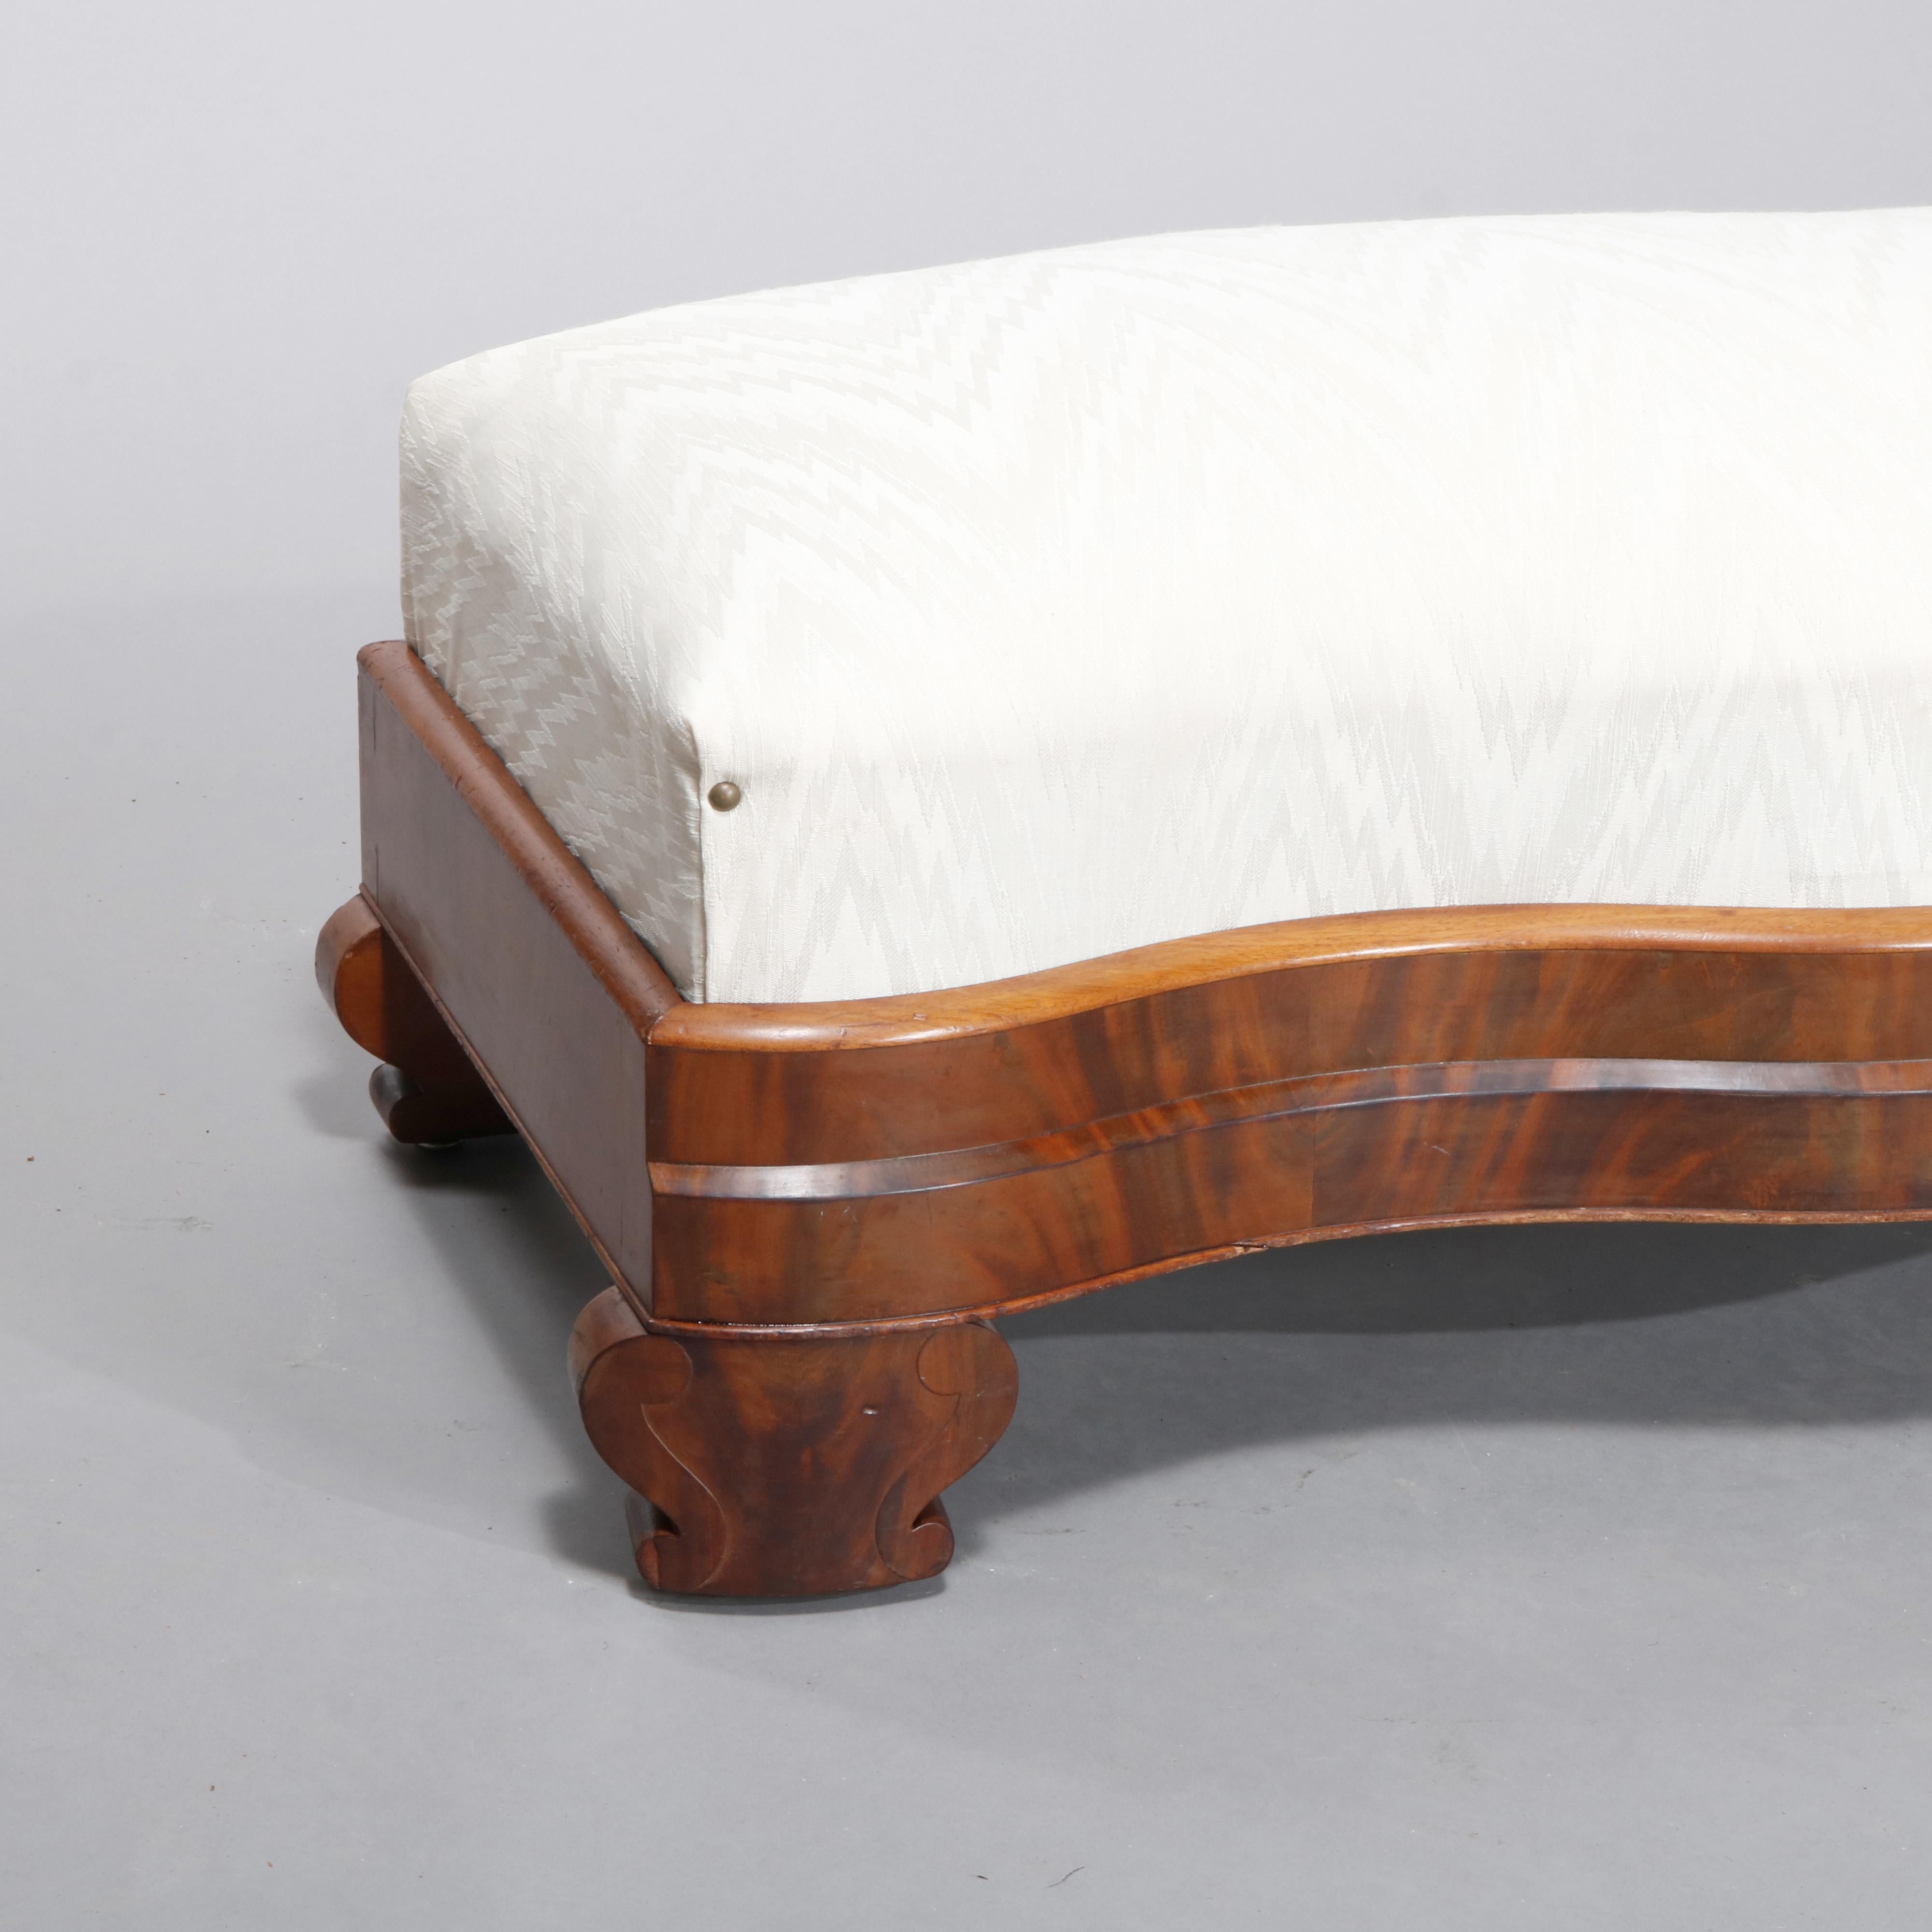 Upholstery American Empire Classical Serpentine Flame Mahogany Slipper Bench, circa 1840 For Sale